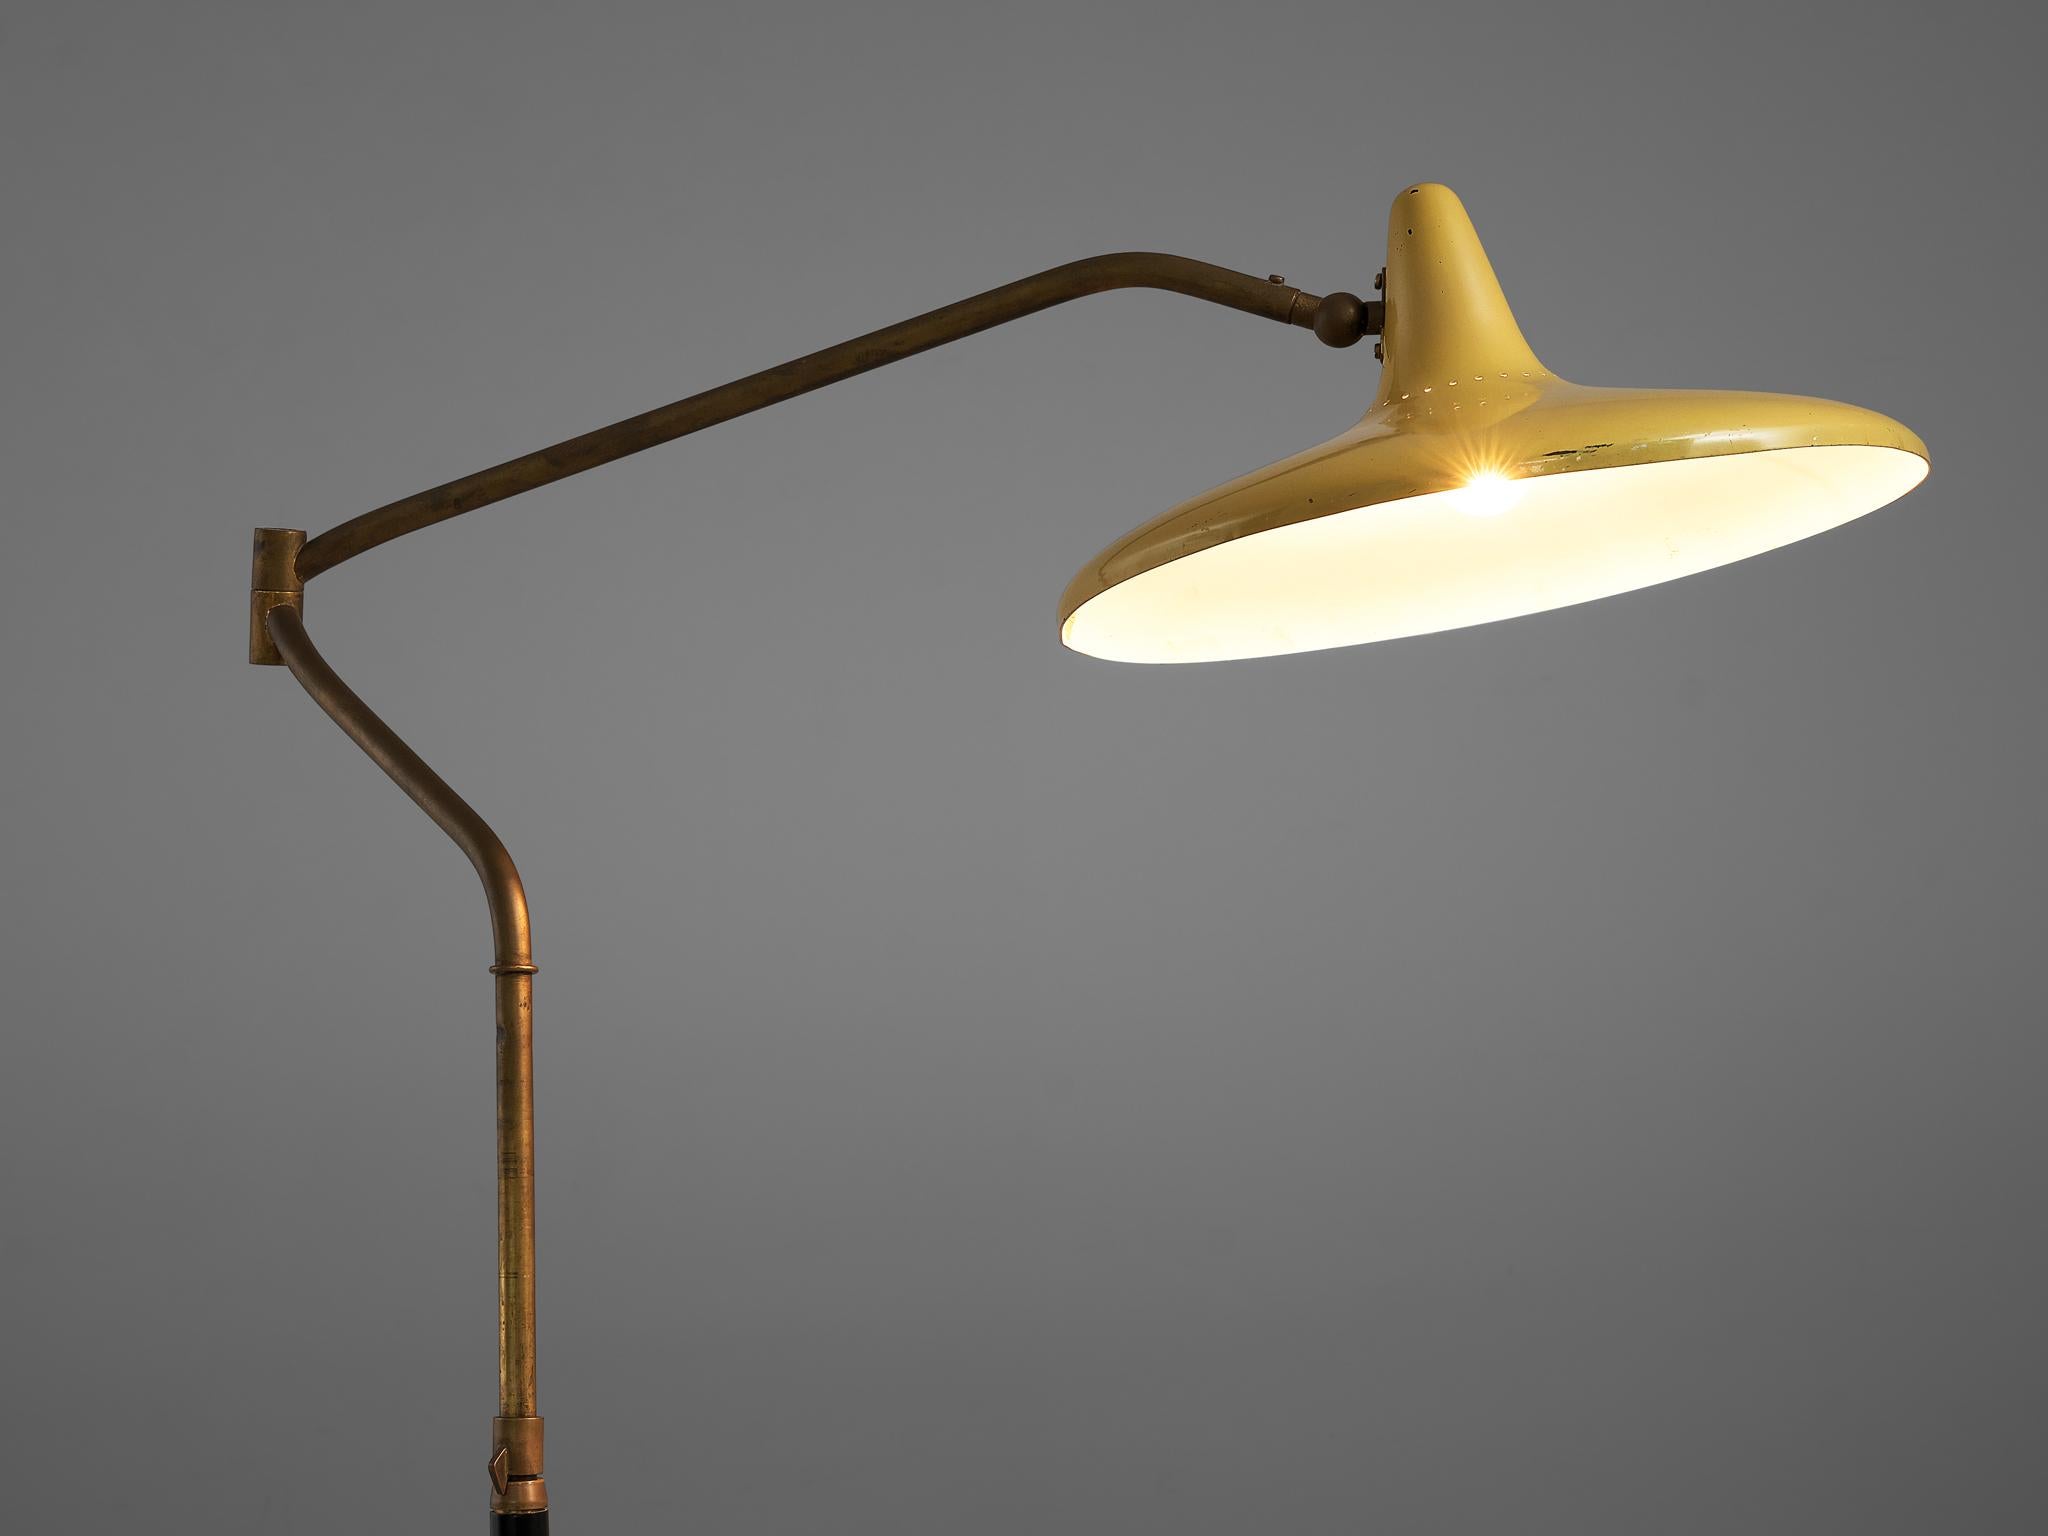 Metal Stilnovo Adjustable Floor Lamp in Marble and Yellow Shade